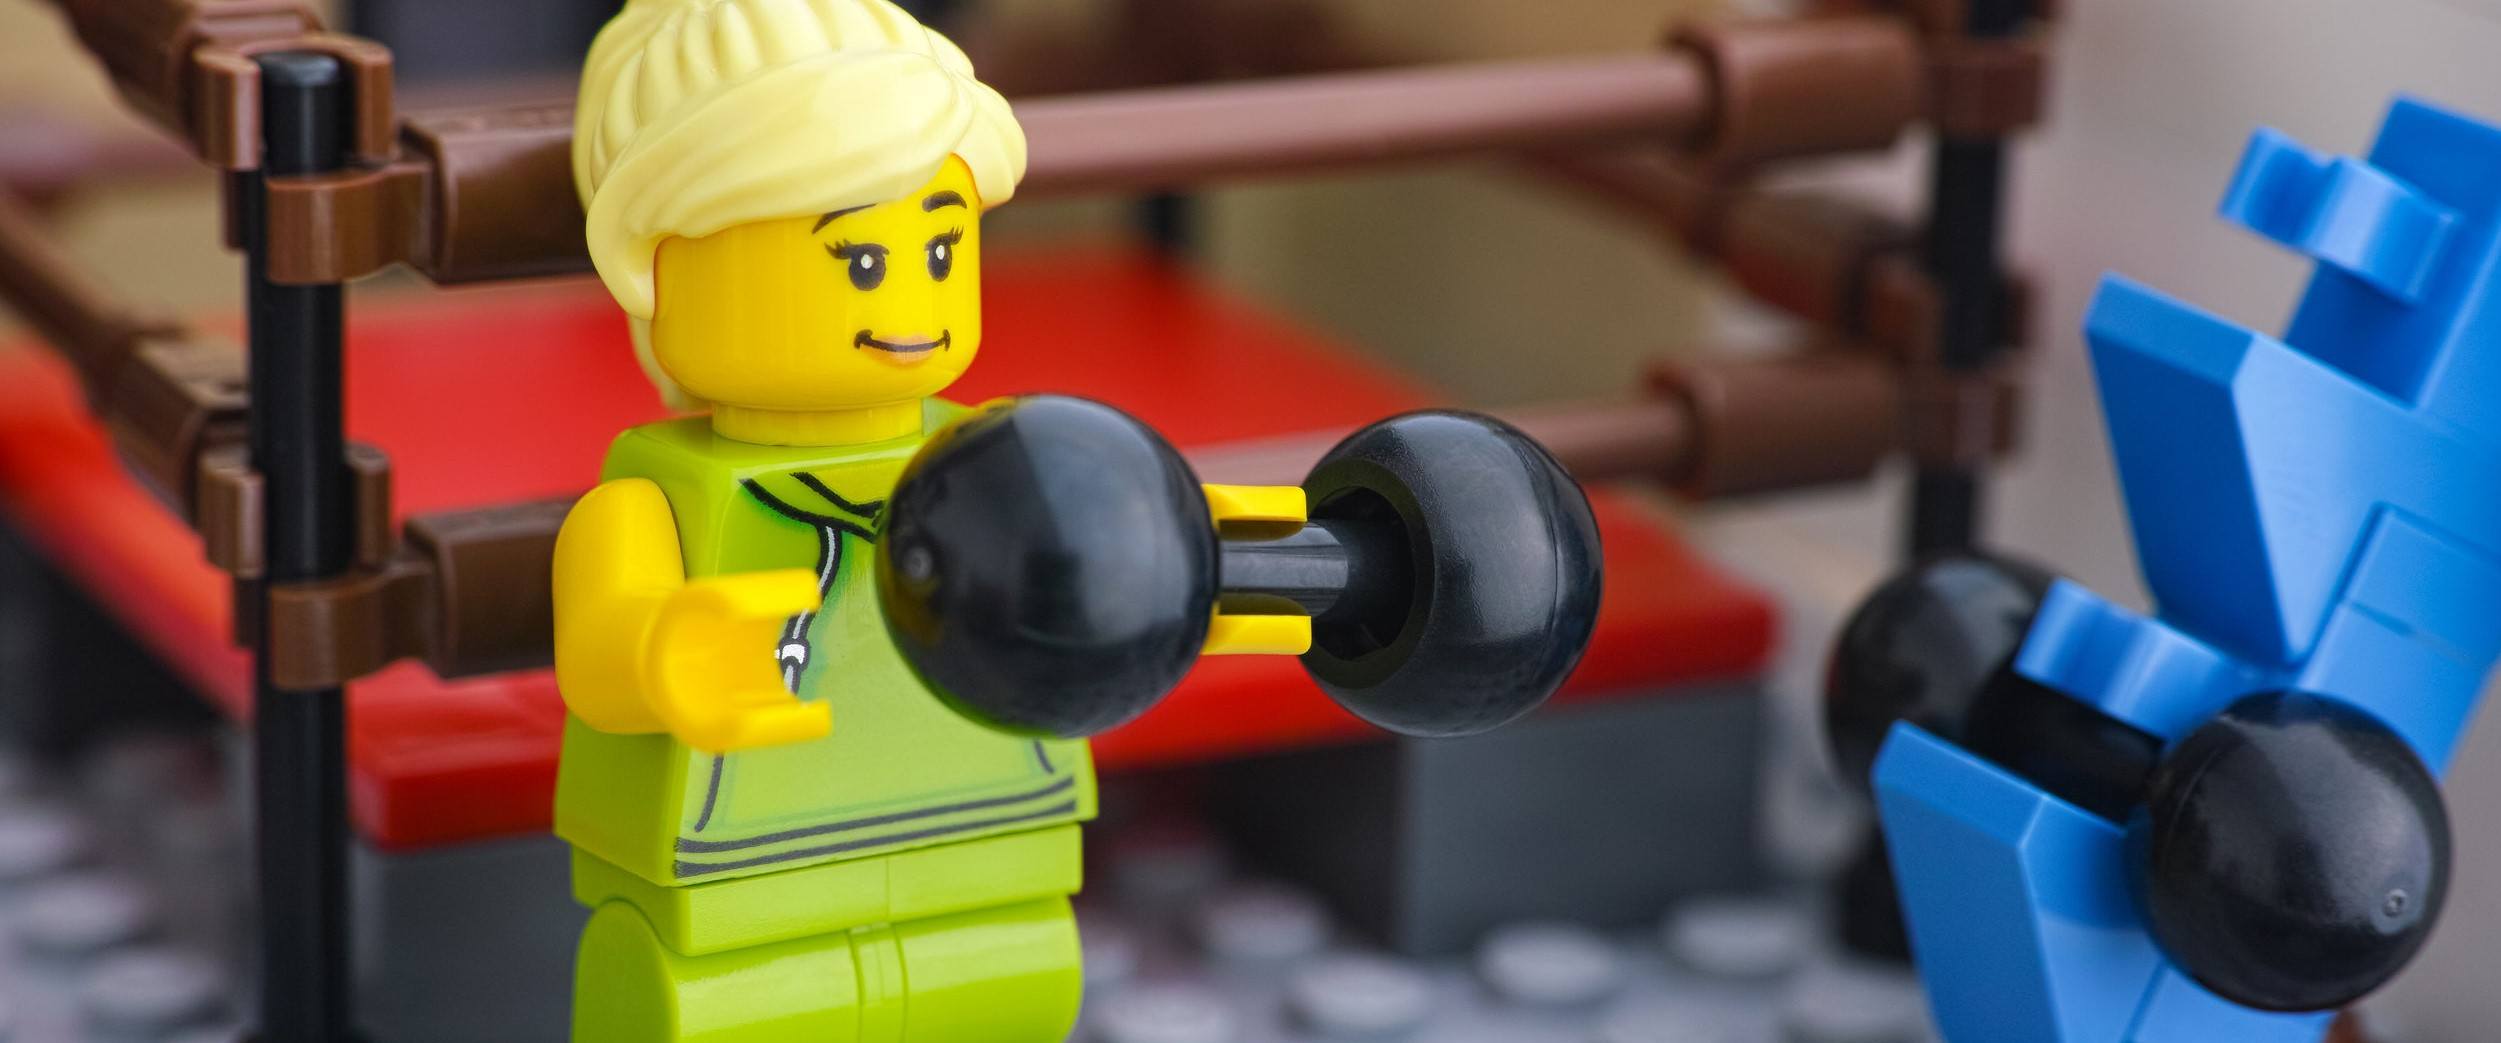 Almost all girl avatars have Lego hands - Imgflip